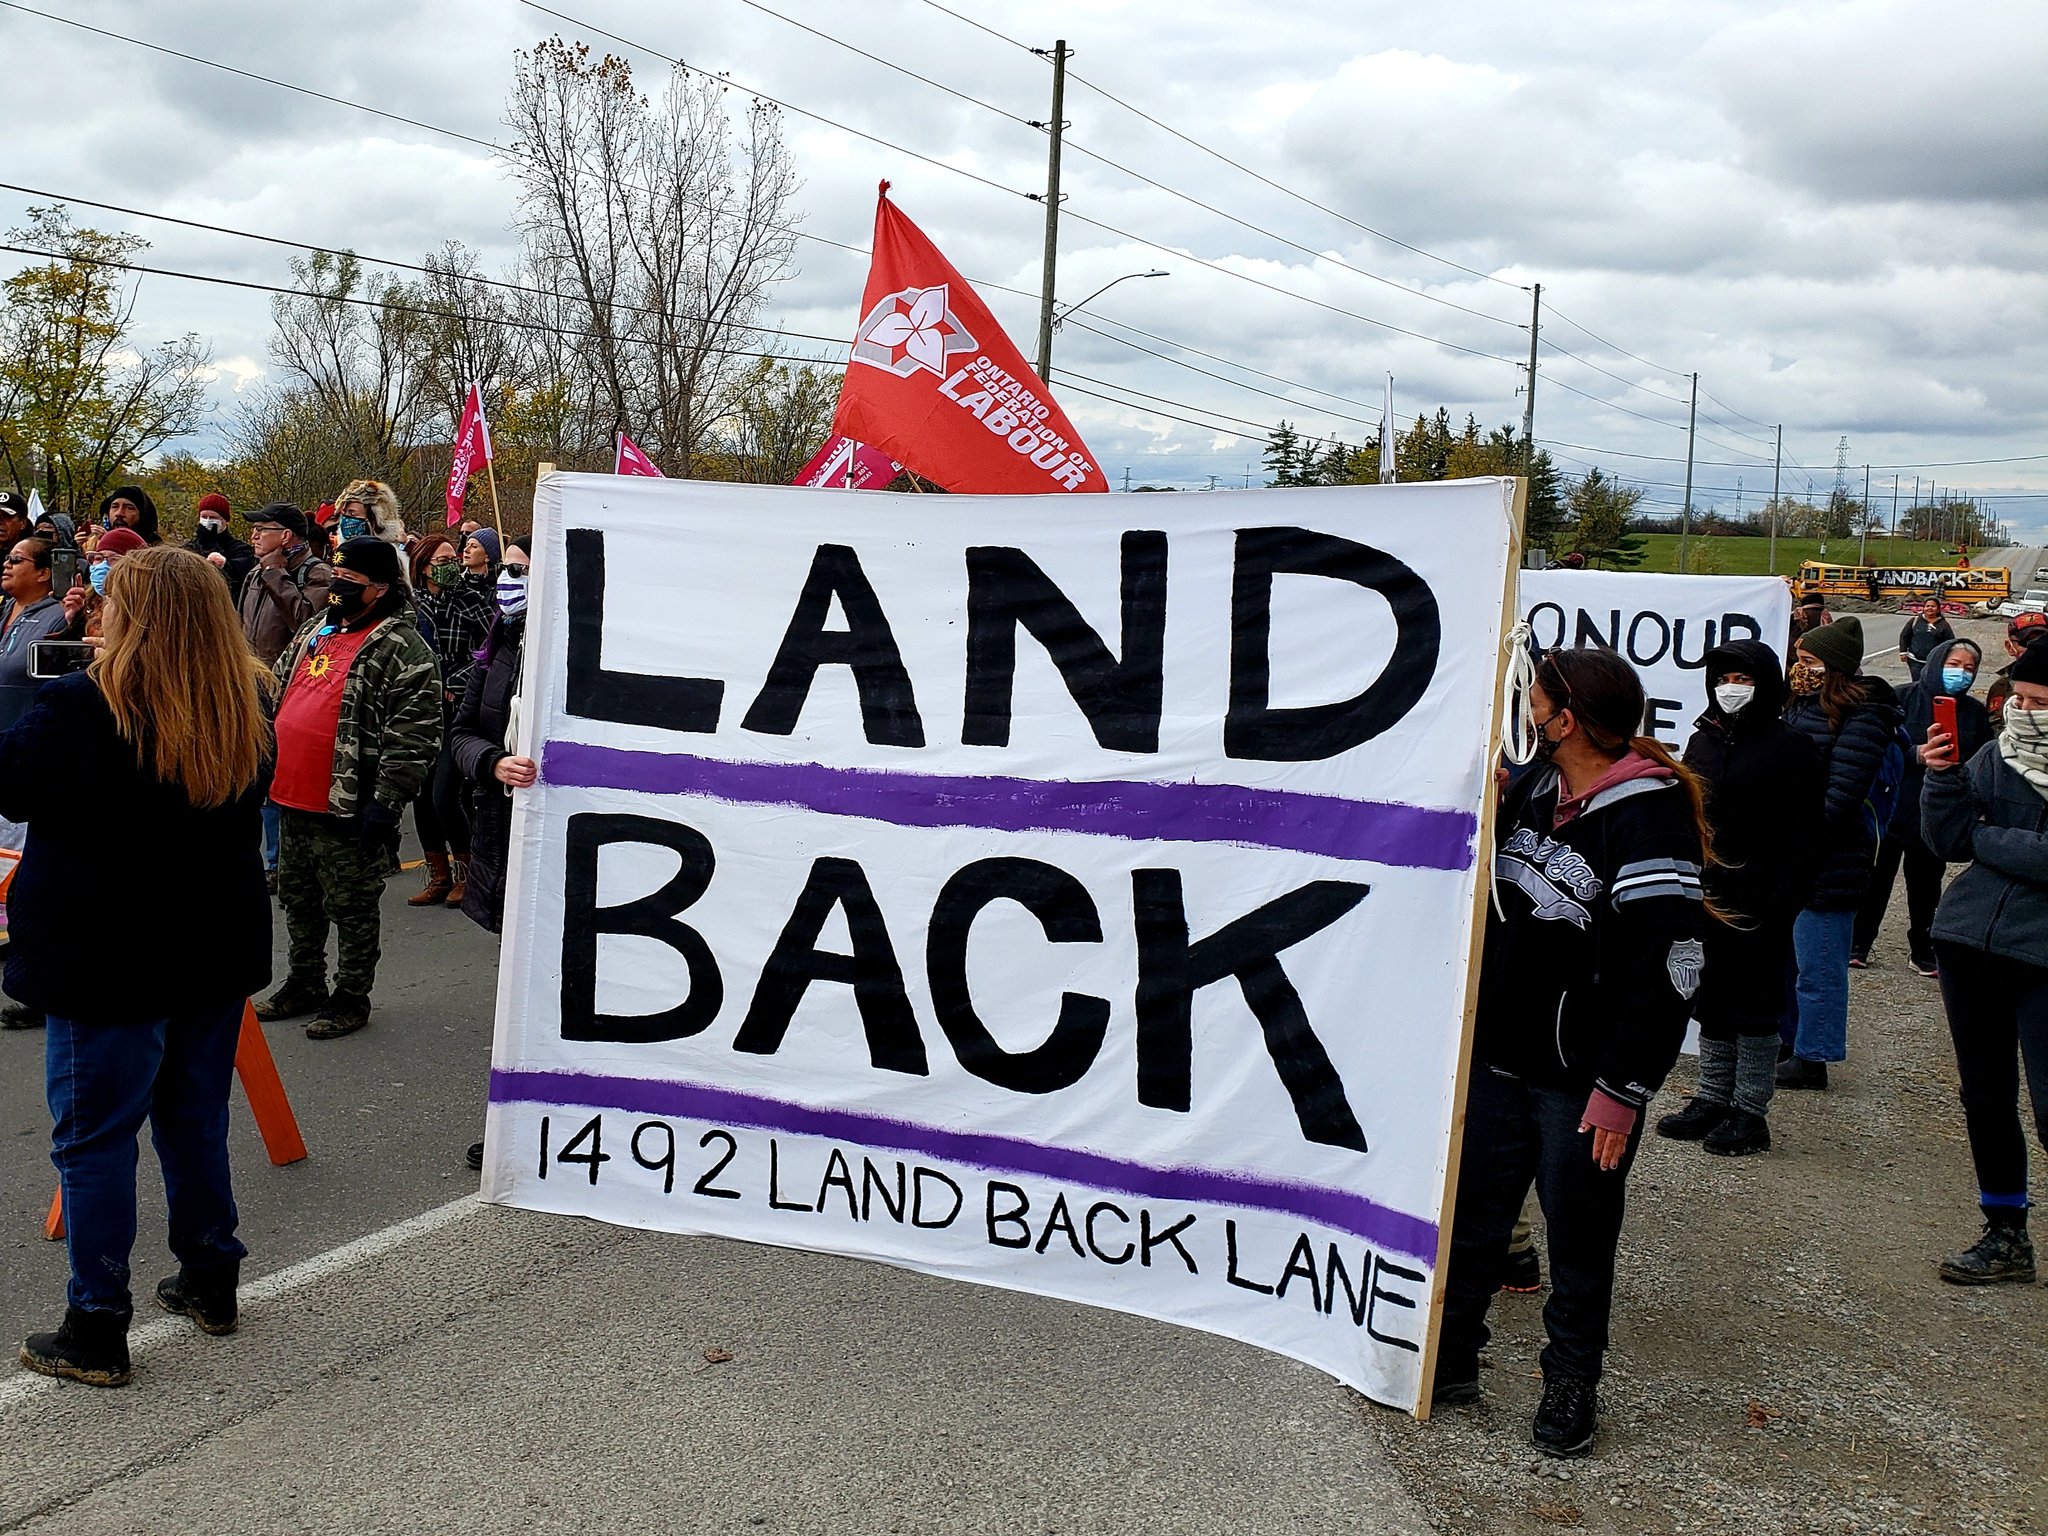 Ontario Labor Federation Marches for 1492 Land Back Lane